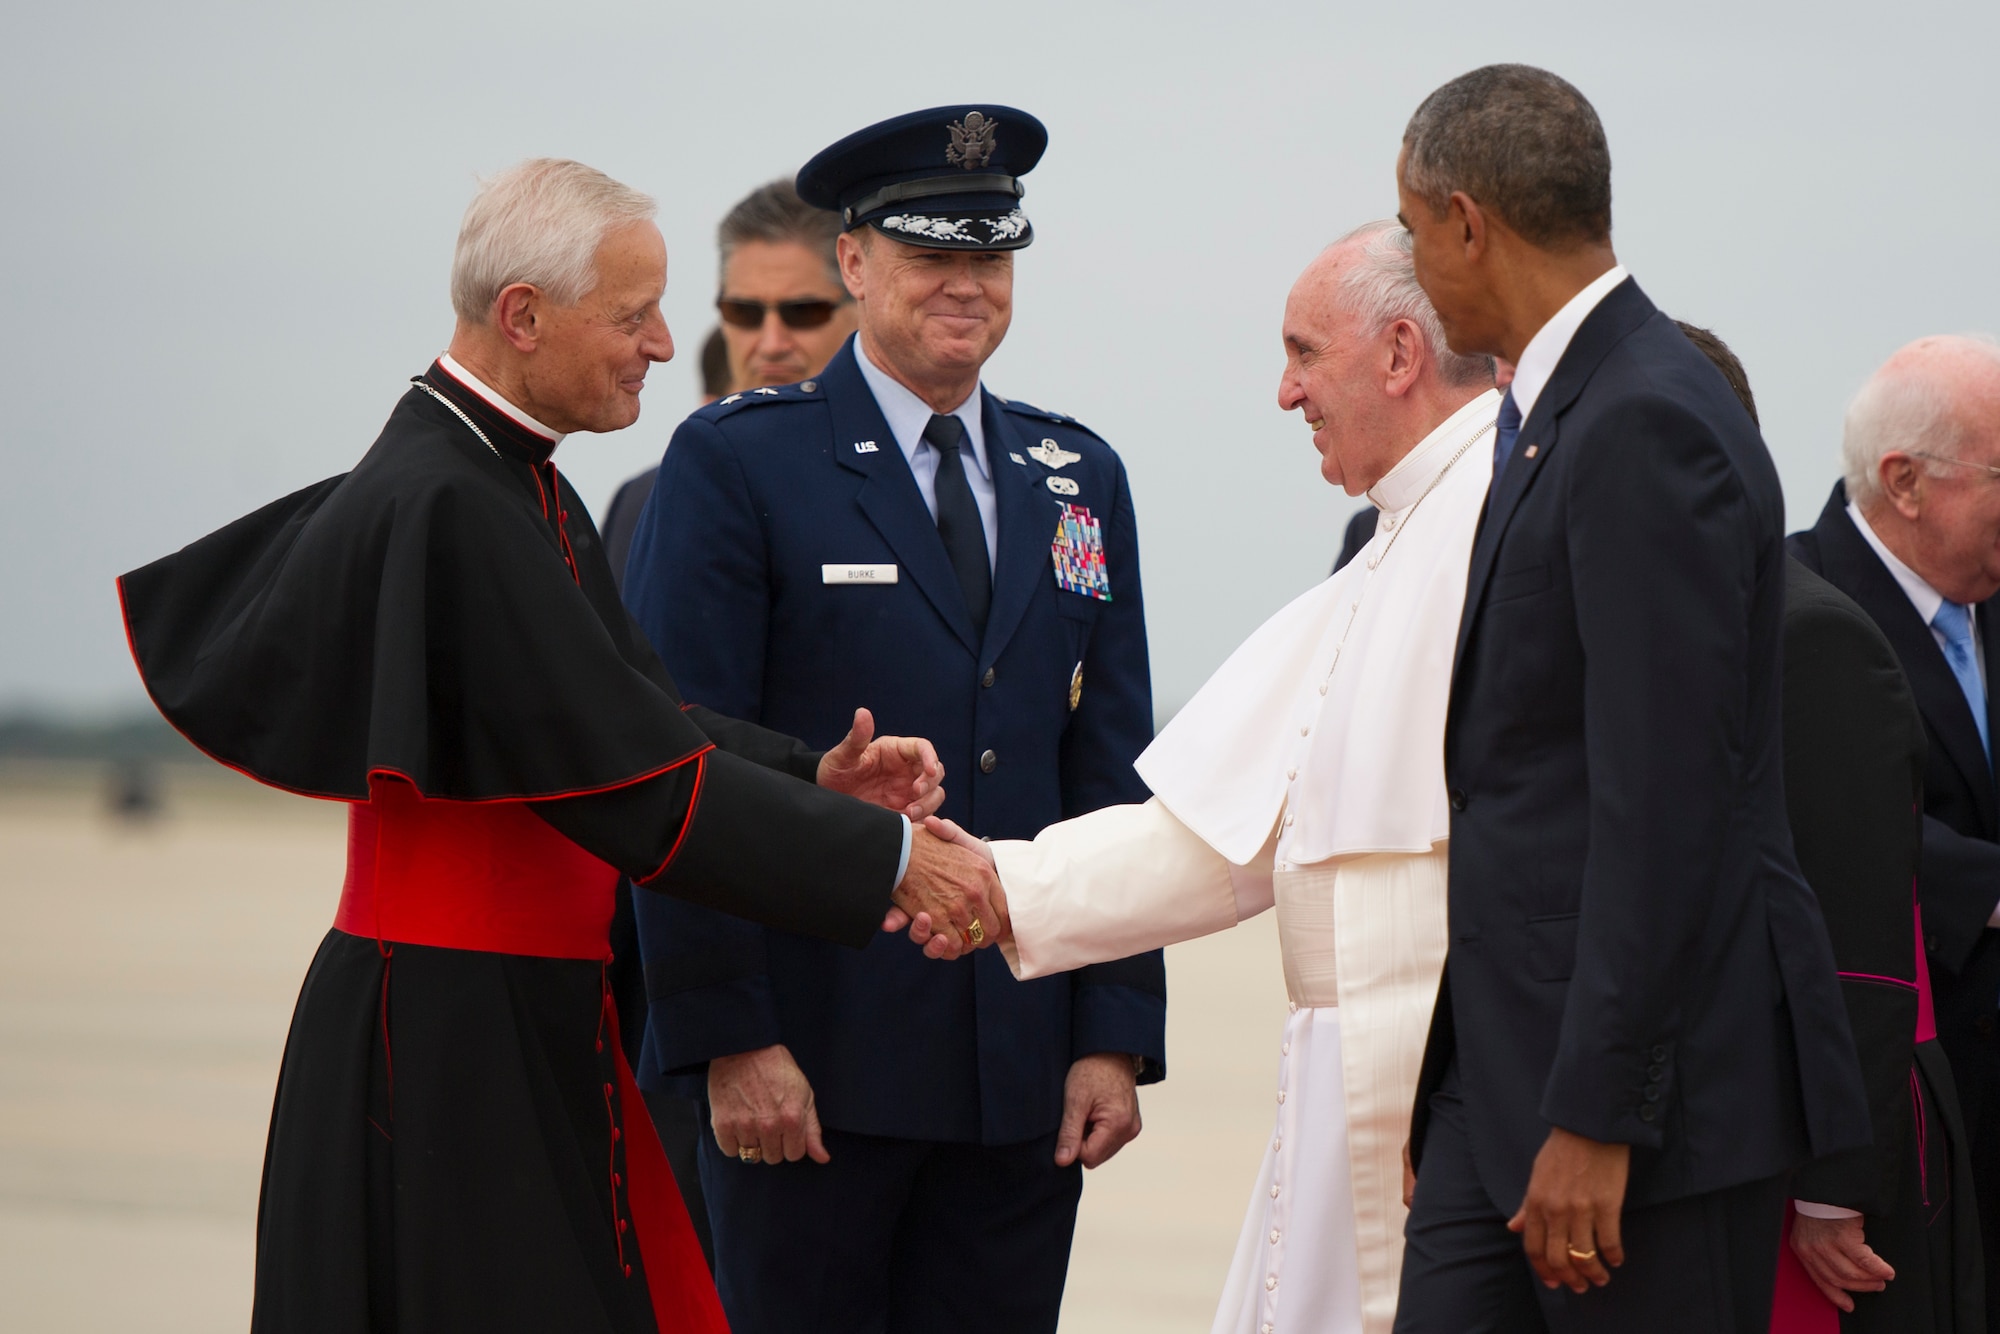 Pope Francis, escorted by President Barack Obama, greets Cardinal Donald W. Wuerl (left), Archbishop of Washington, and Maj. Gen. Darryl Burke, Air Force District of Washington commander, at Joint Base Andrews, Md., Sept. 22, 2015. This marks the first visit by the current pope to the United States. (U.S. Air Force photo/Tech. Sgt. Robert Cloys)